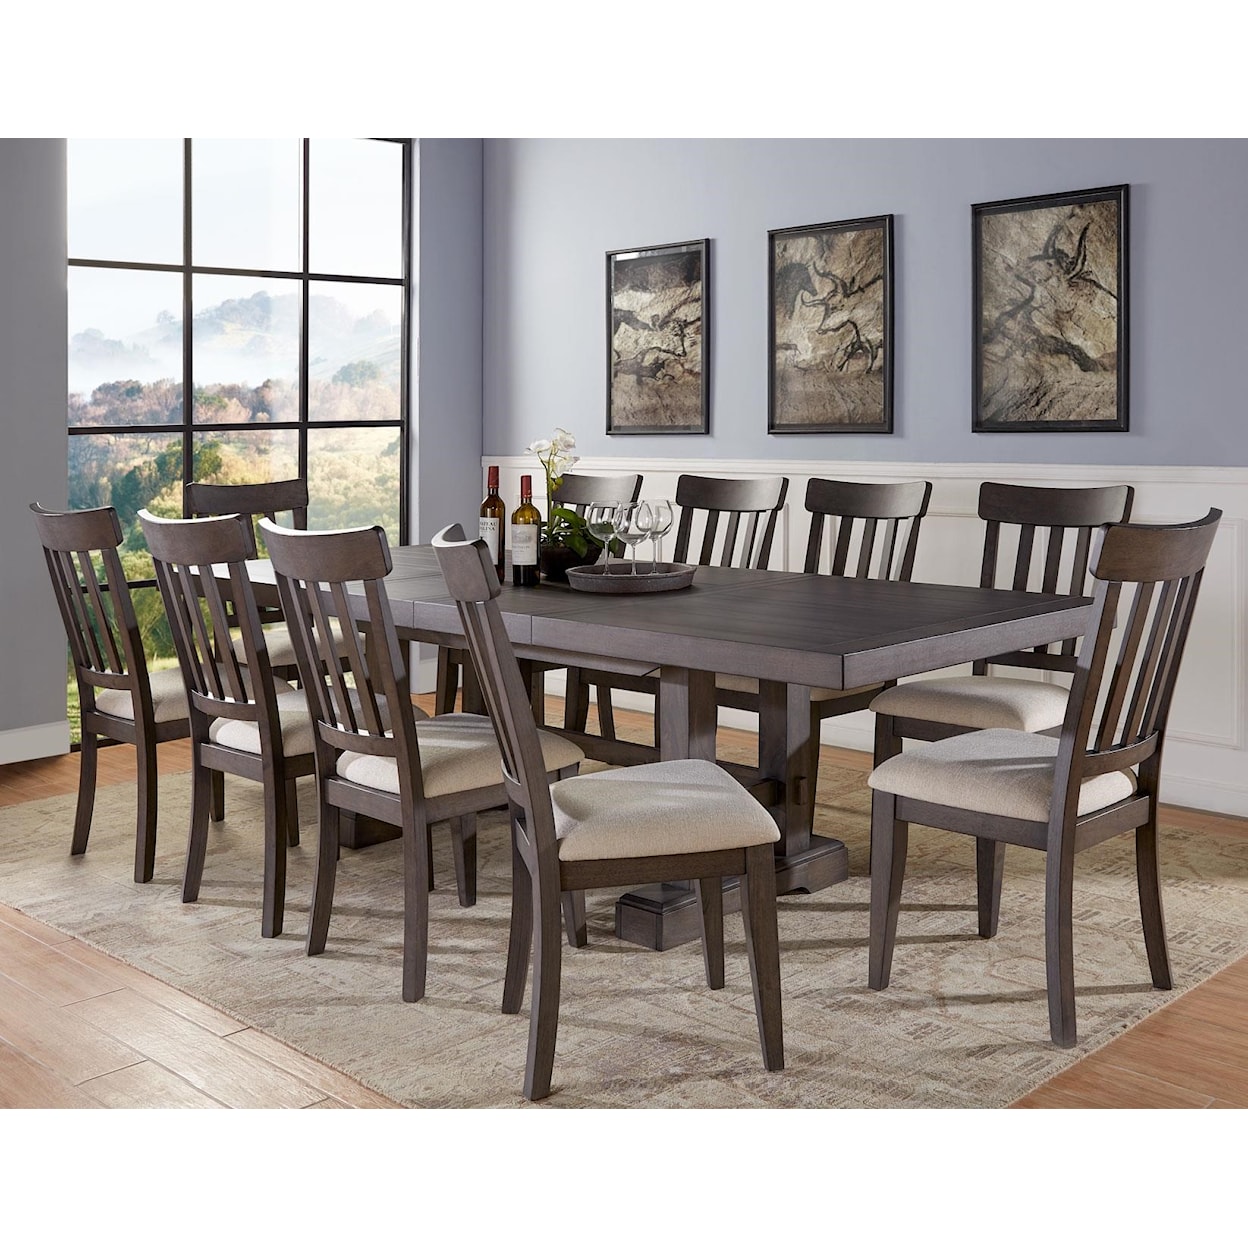 Steve Silver Napa 10 Piece Table and Chair Set